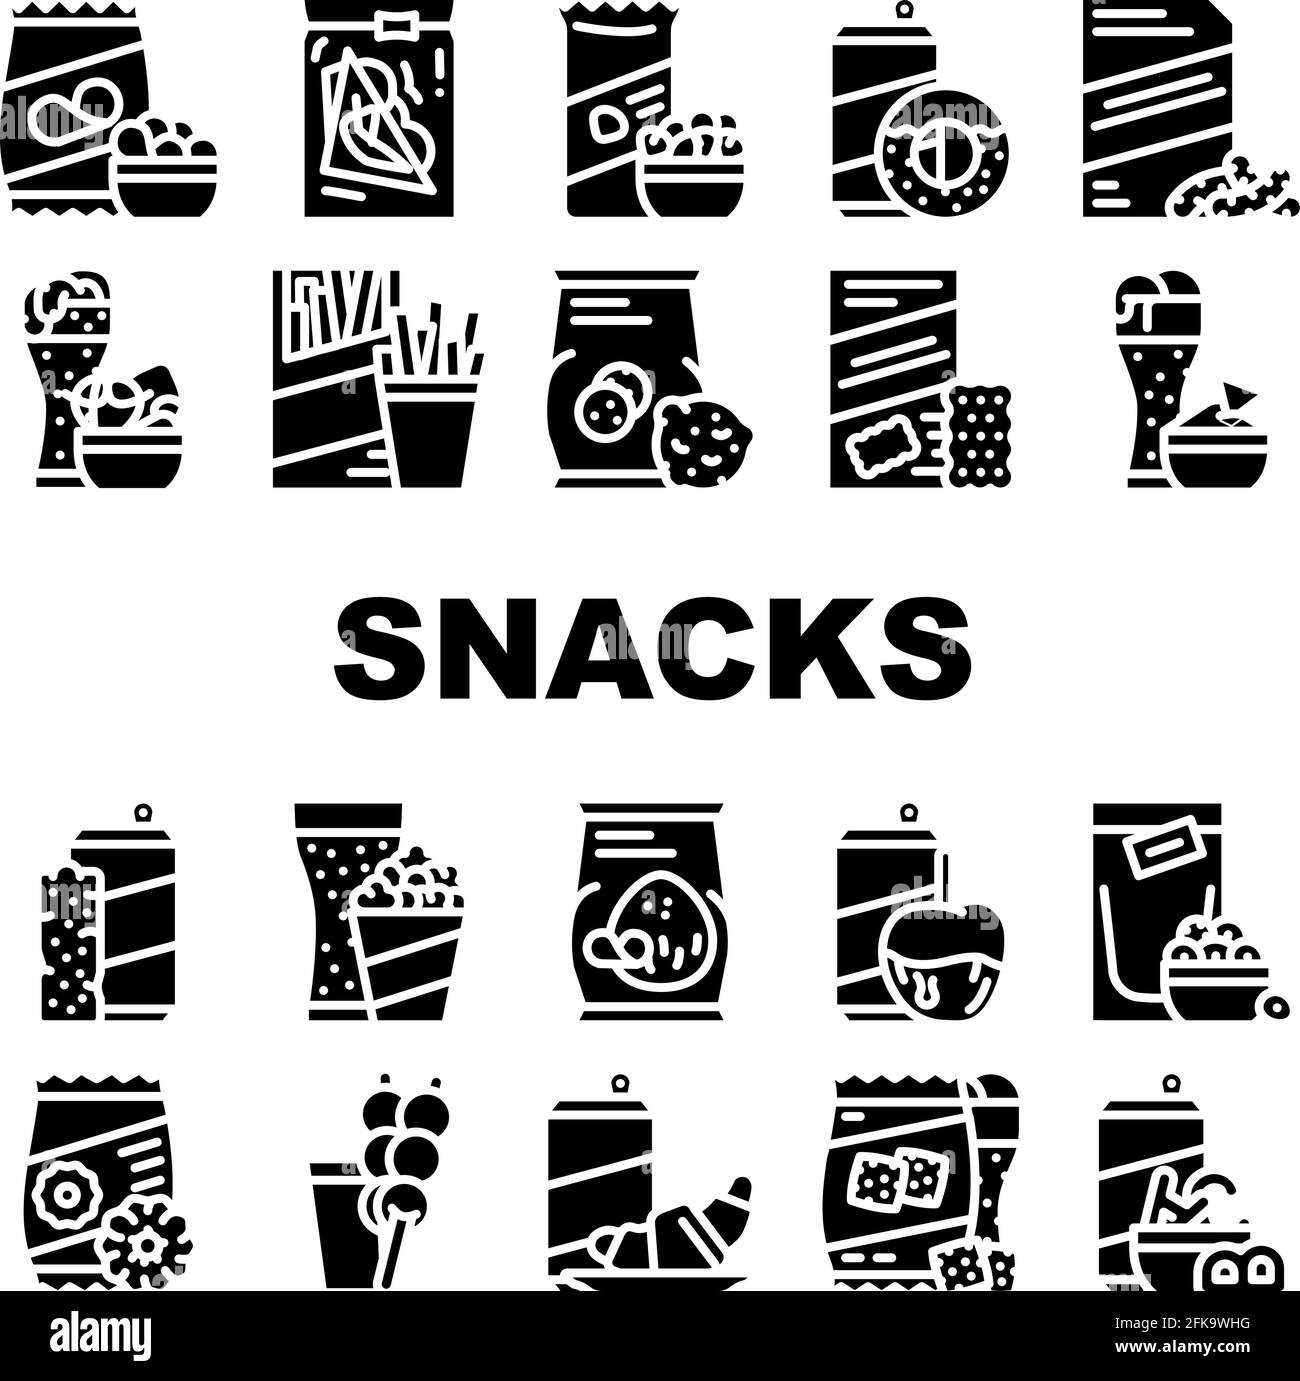 Snacks Food And Drink Collection Icons Set Vector Stock Vector